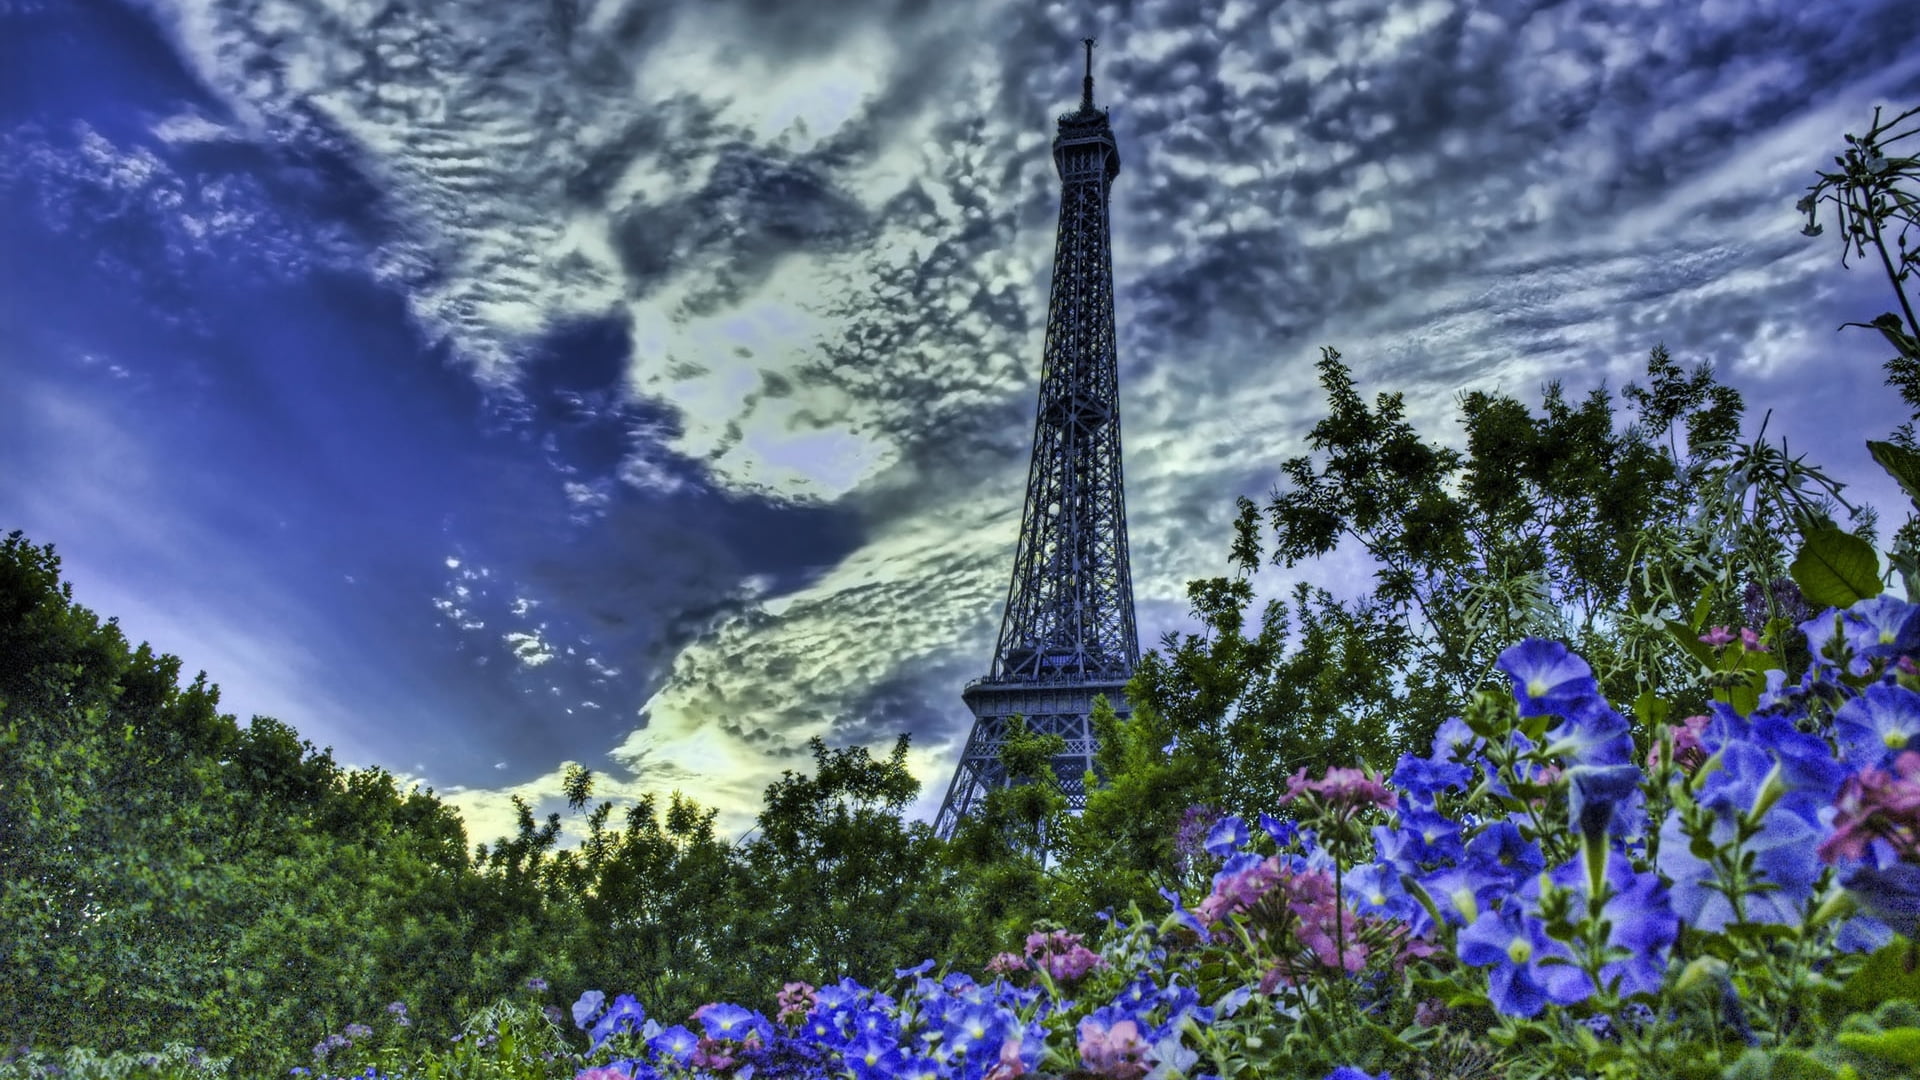 Eiffel Tower surrounded by flowers during blue sky